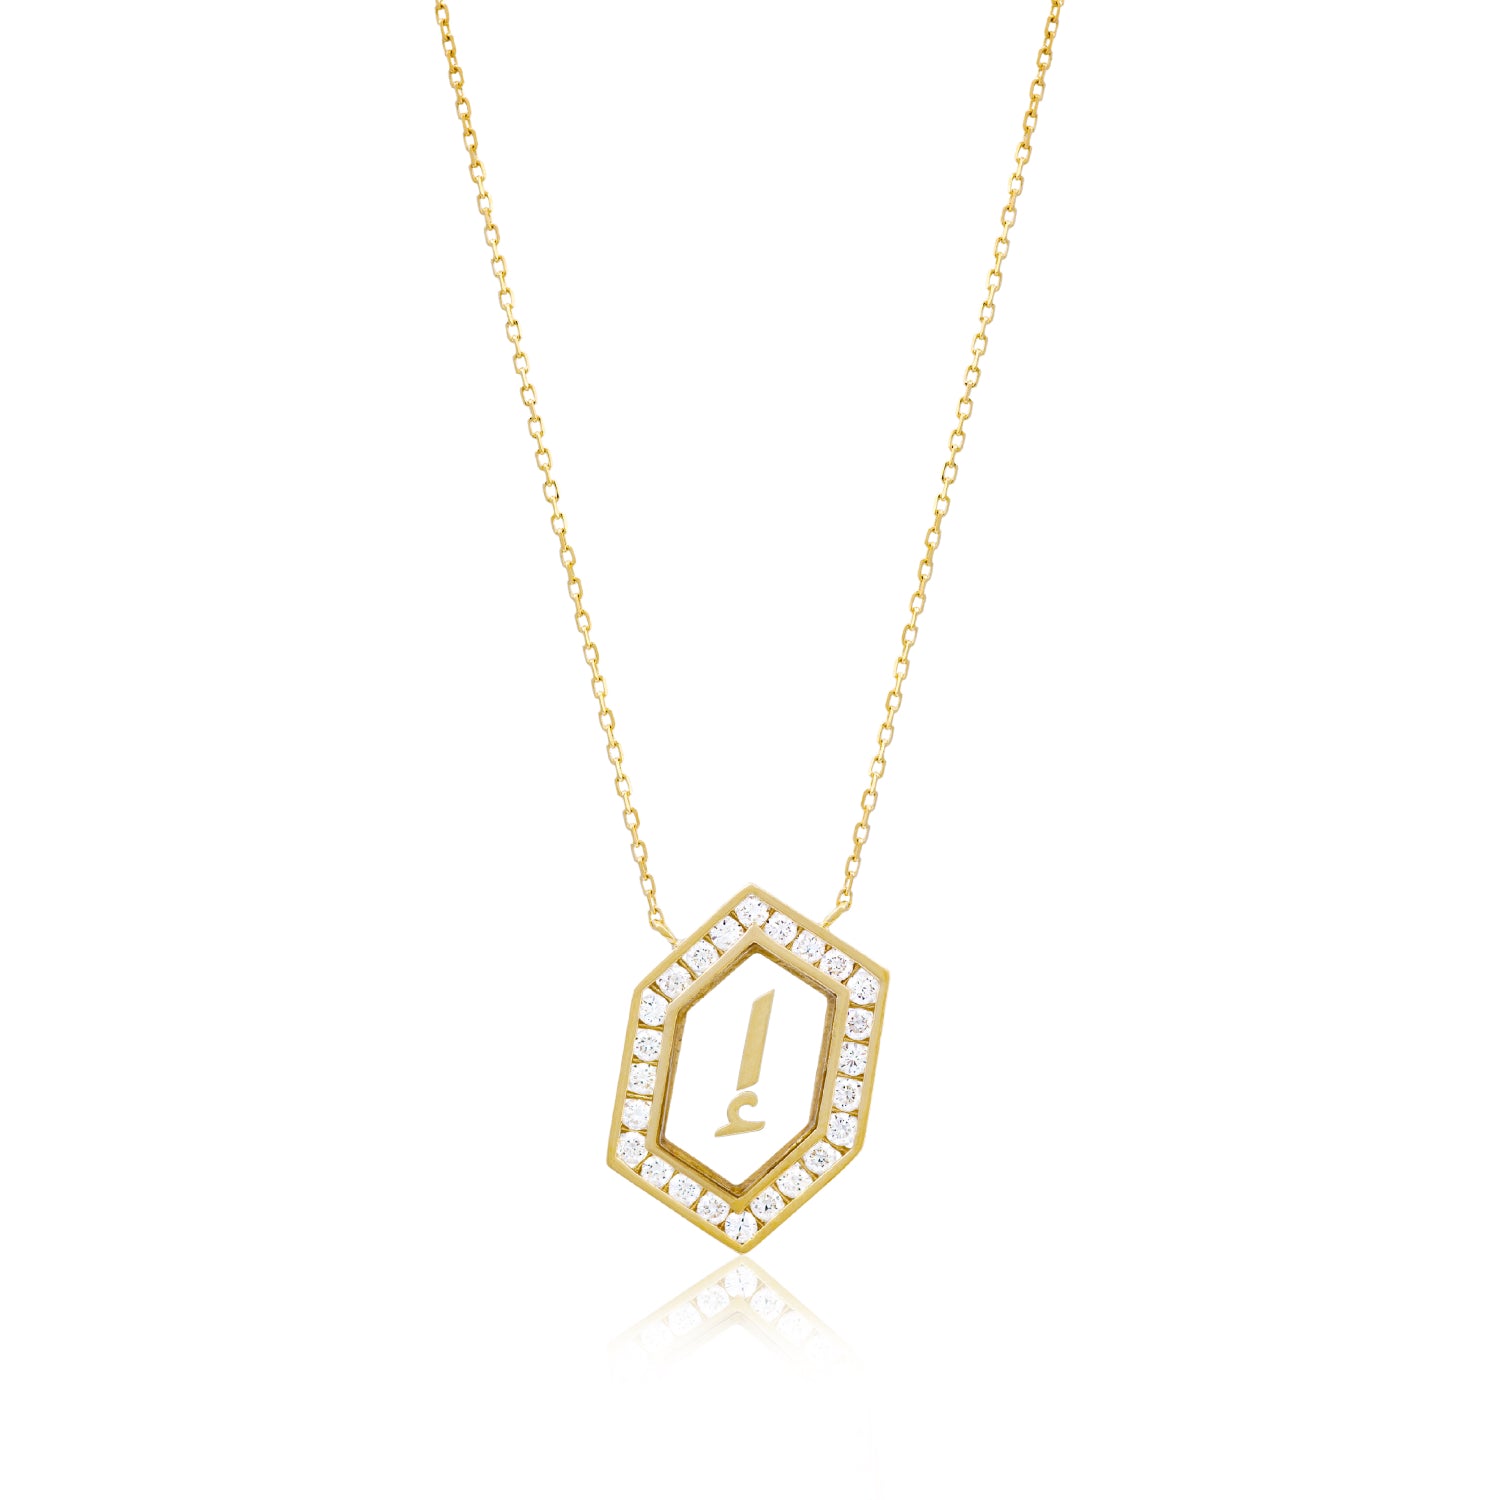 Qamoos 1.0 Letter إ Diamond Necklace in Yellow Gold